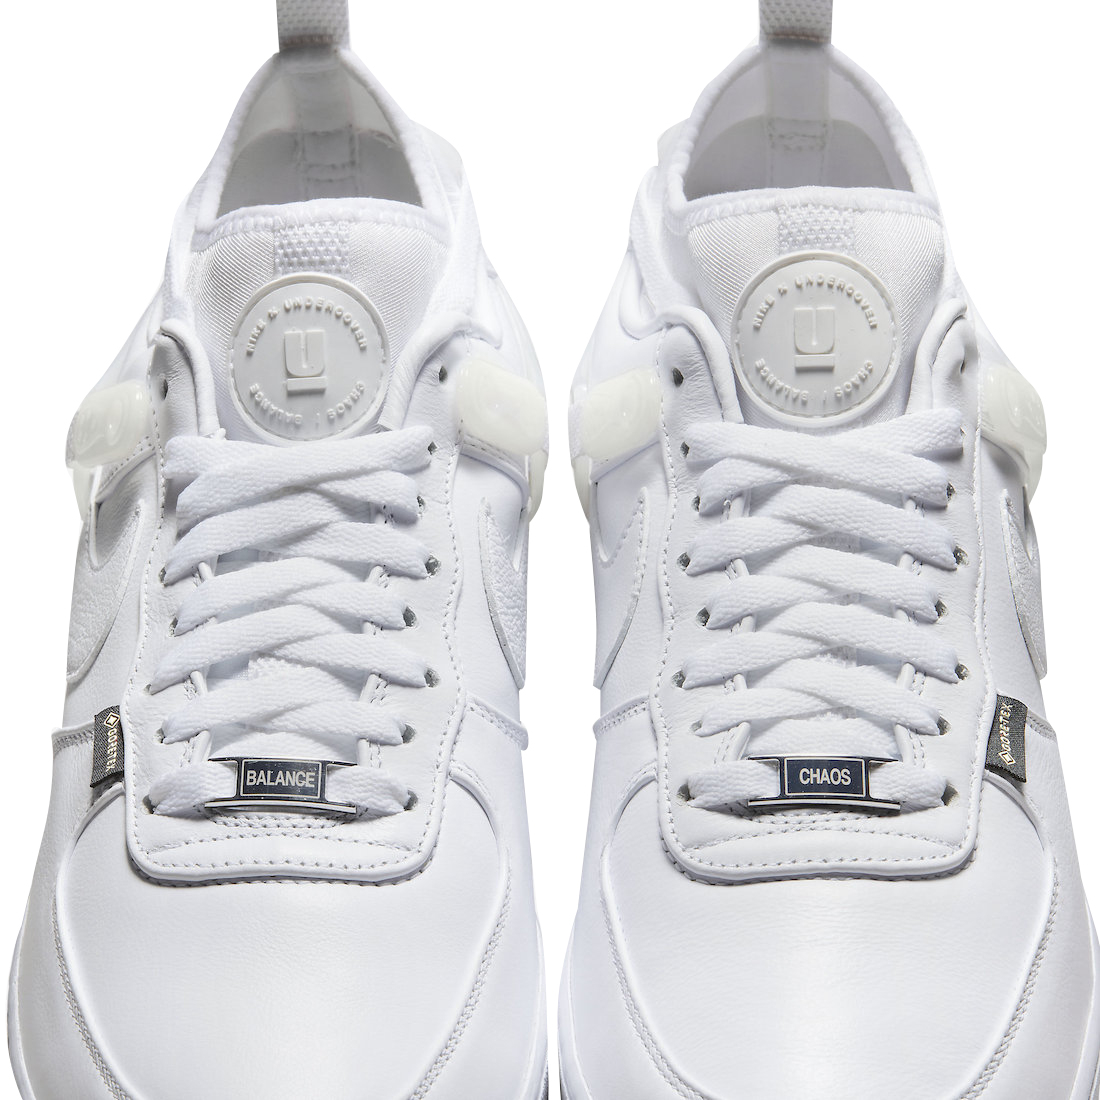 BUY Undercover X Nike Air Force 1 Low White | Kixify Marketplace